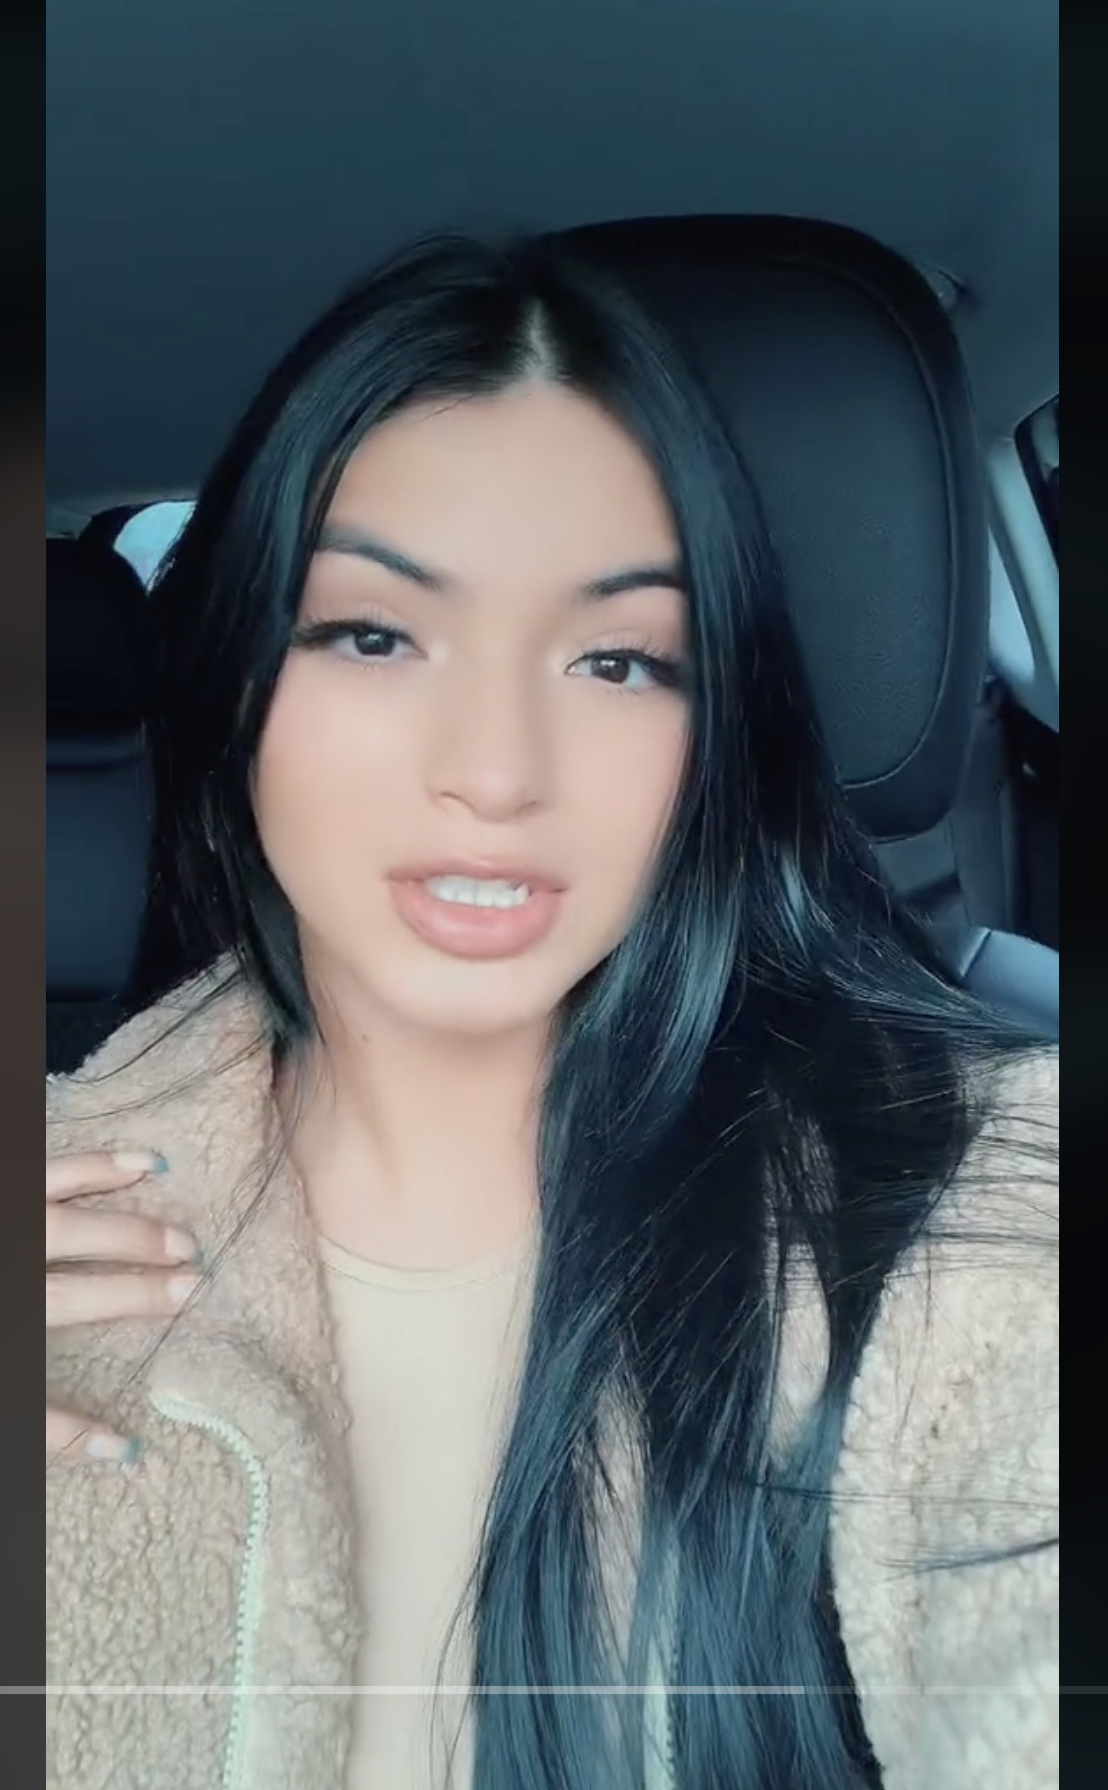 TikToker @yourstruly_lv as seen in a video dated January 22, 2023 | Source: Source: TikTok/yourstruly_lv